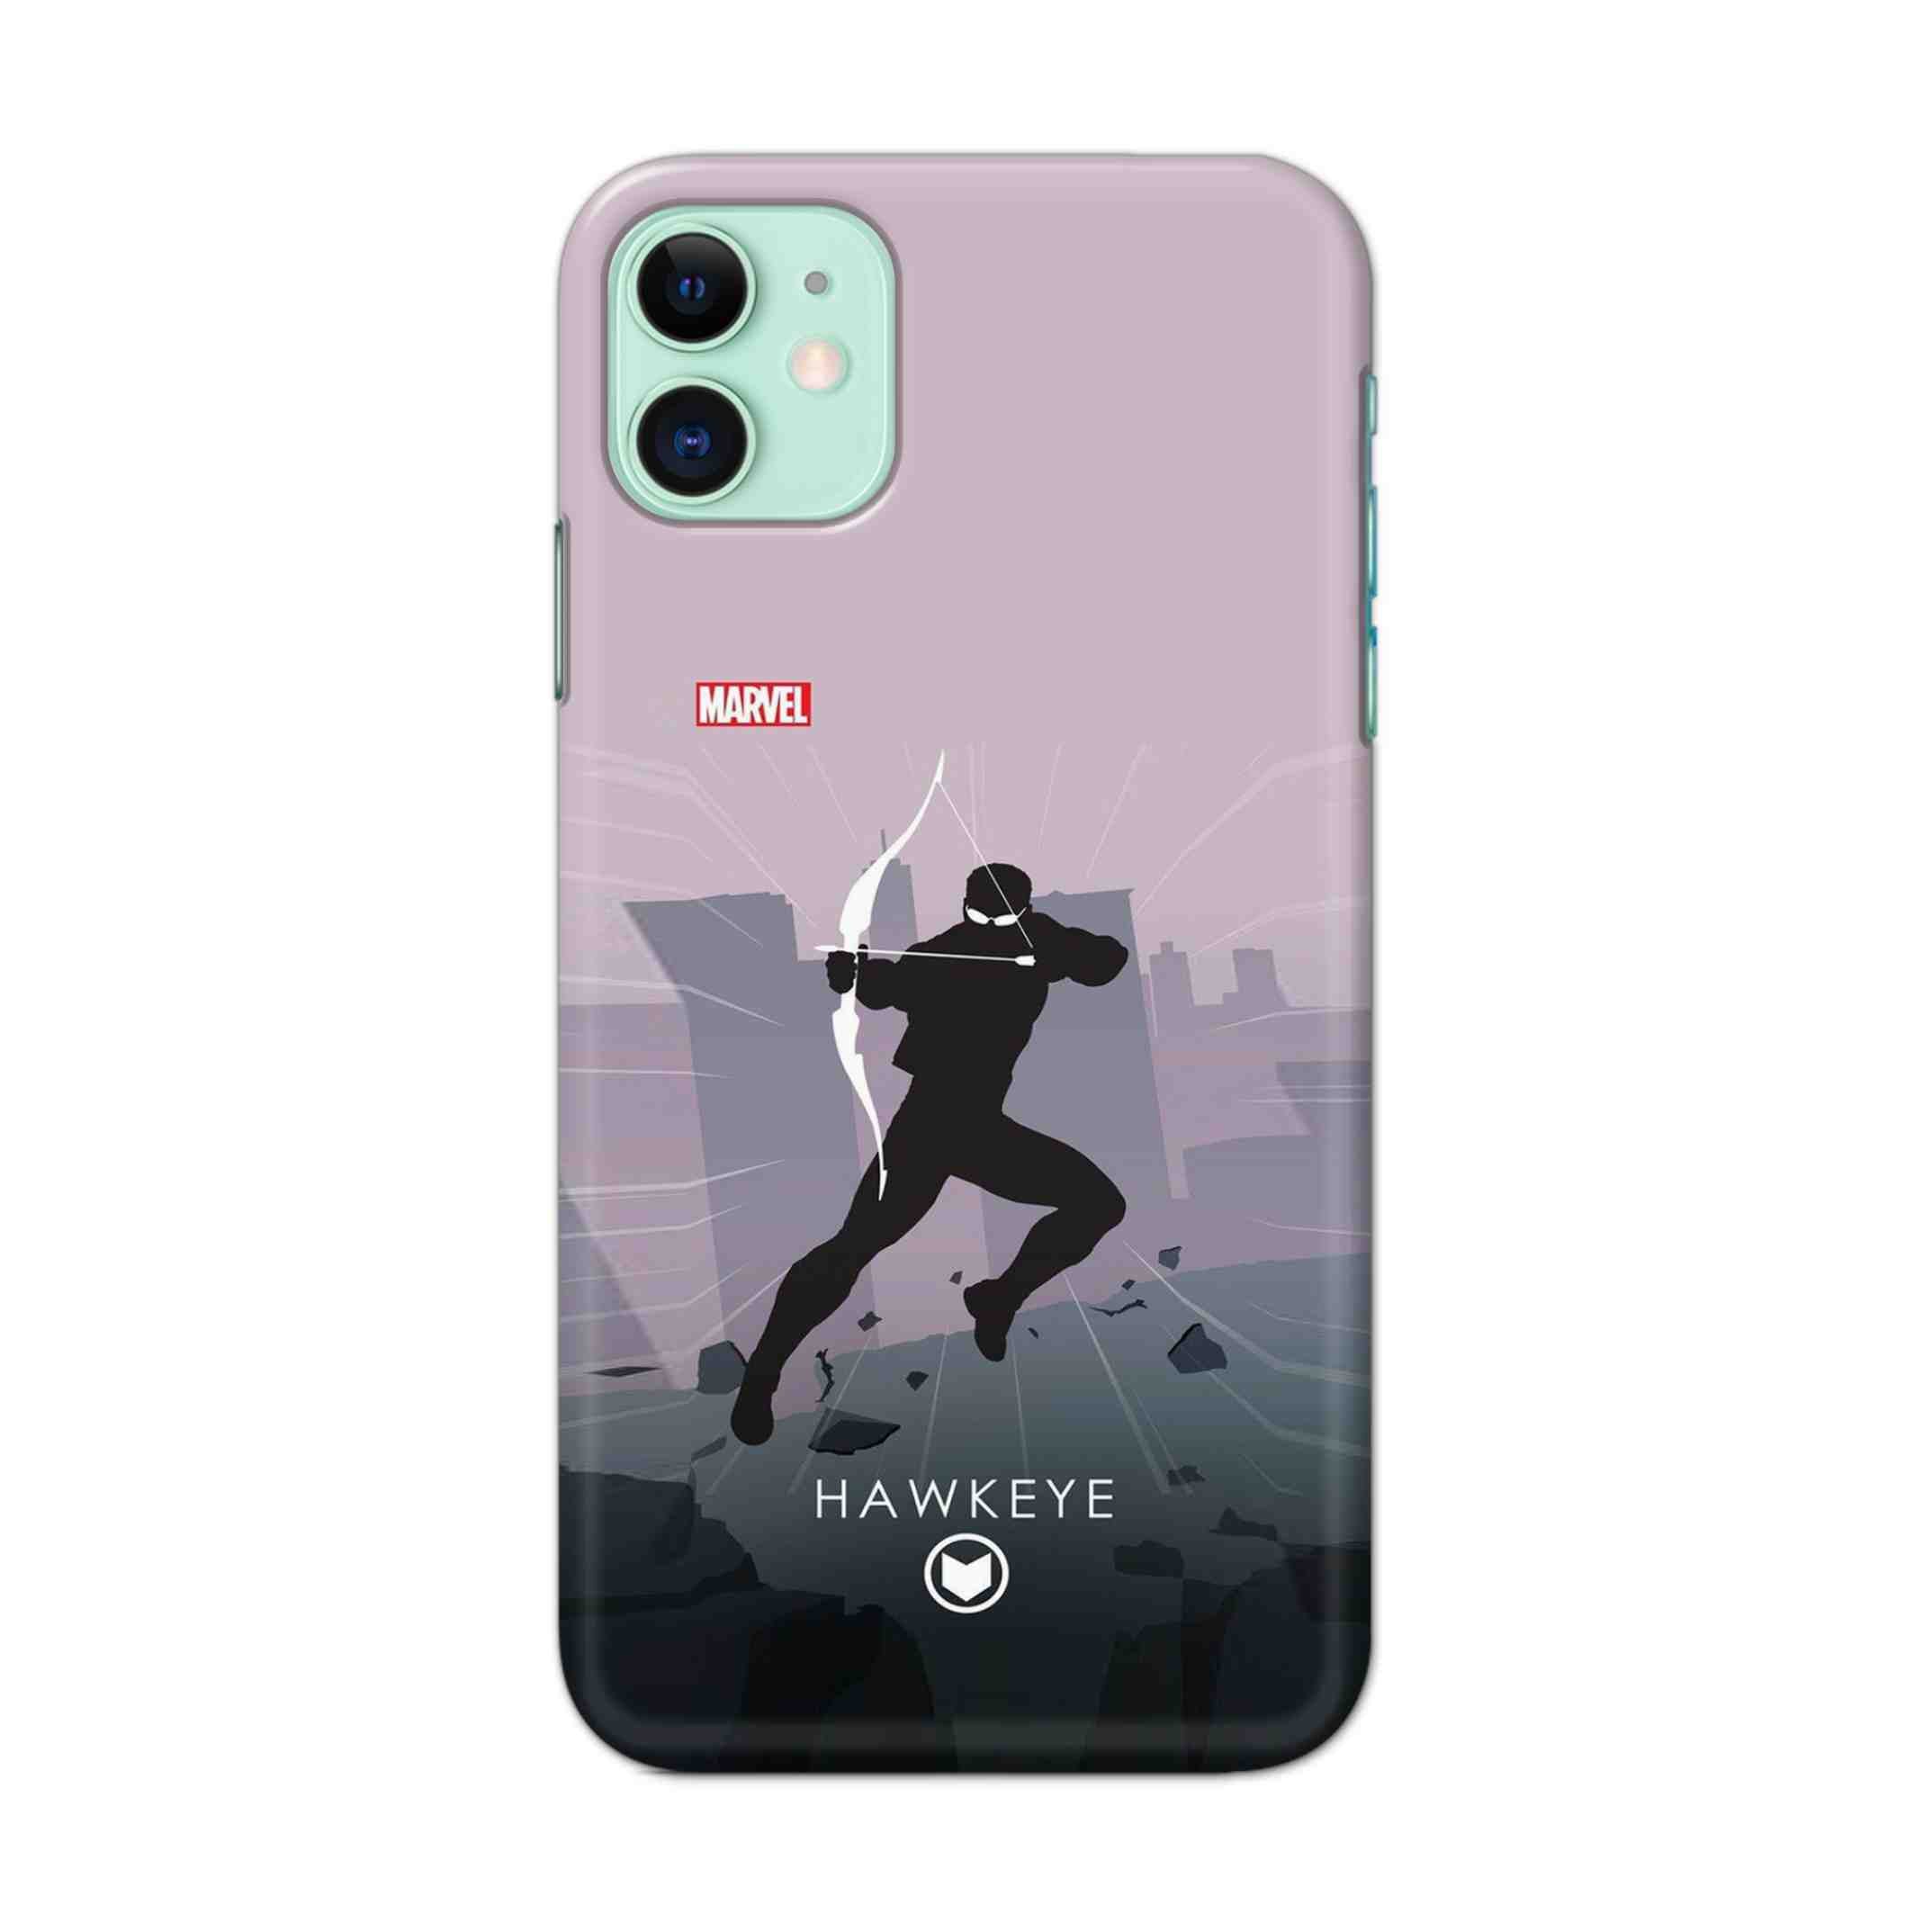 Buy Hawkeye Hard Back Mobile Phone Case/Cover For iPhone 11 Online